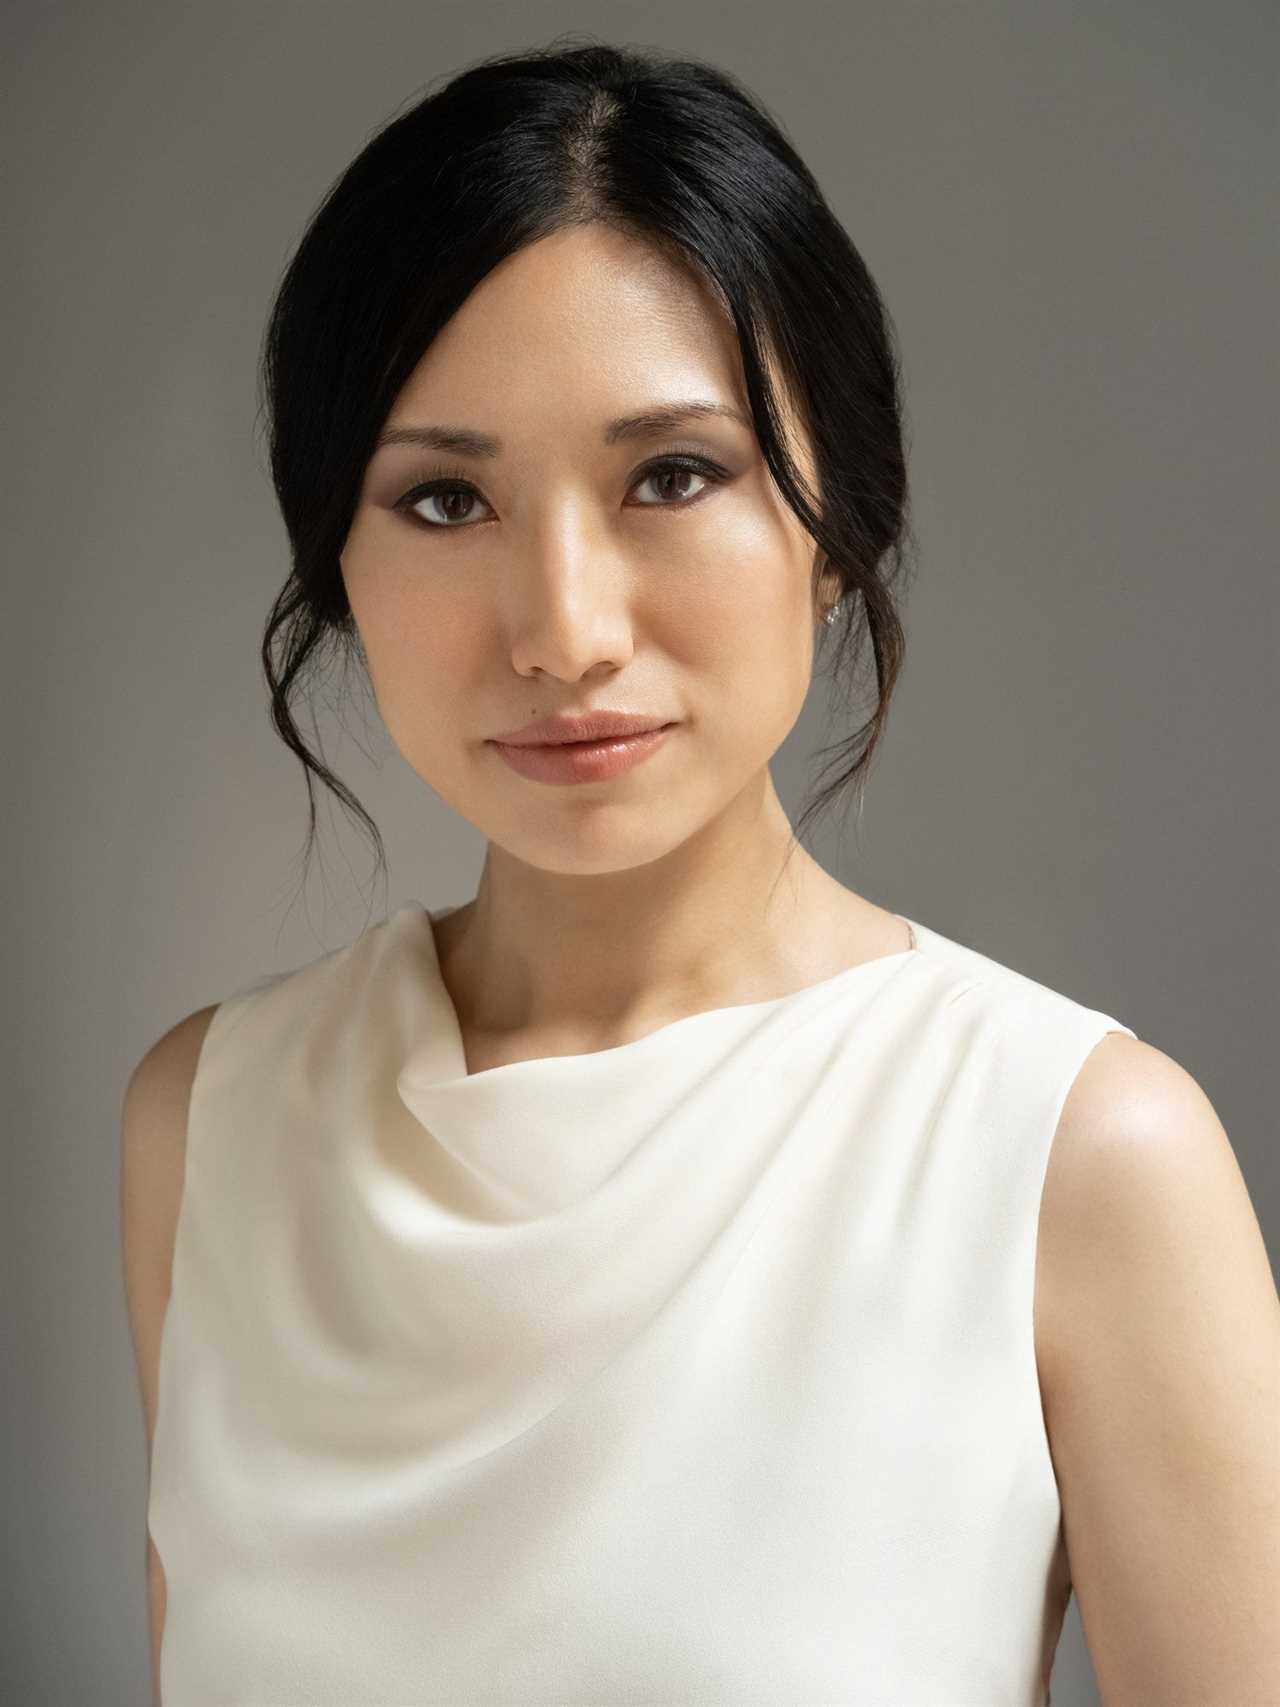 Carrie Sun, author of Private Equity